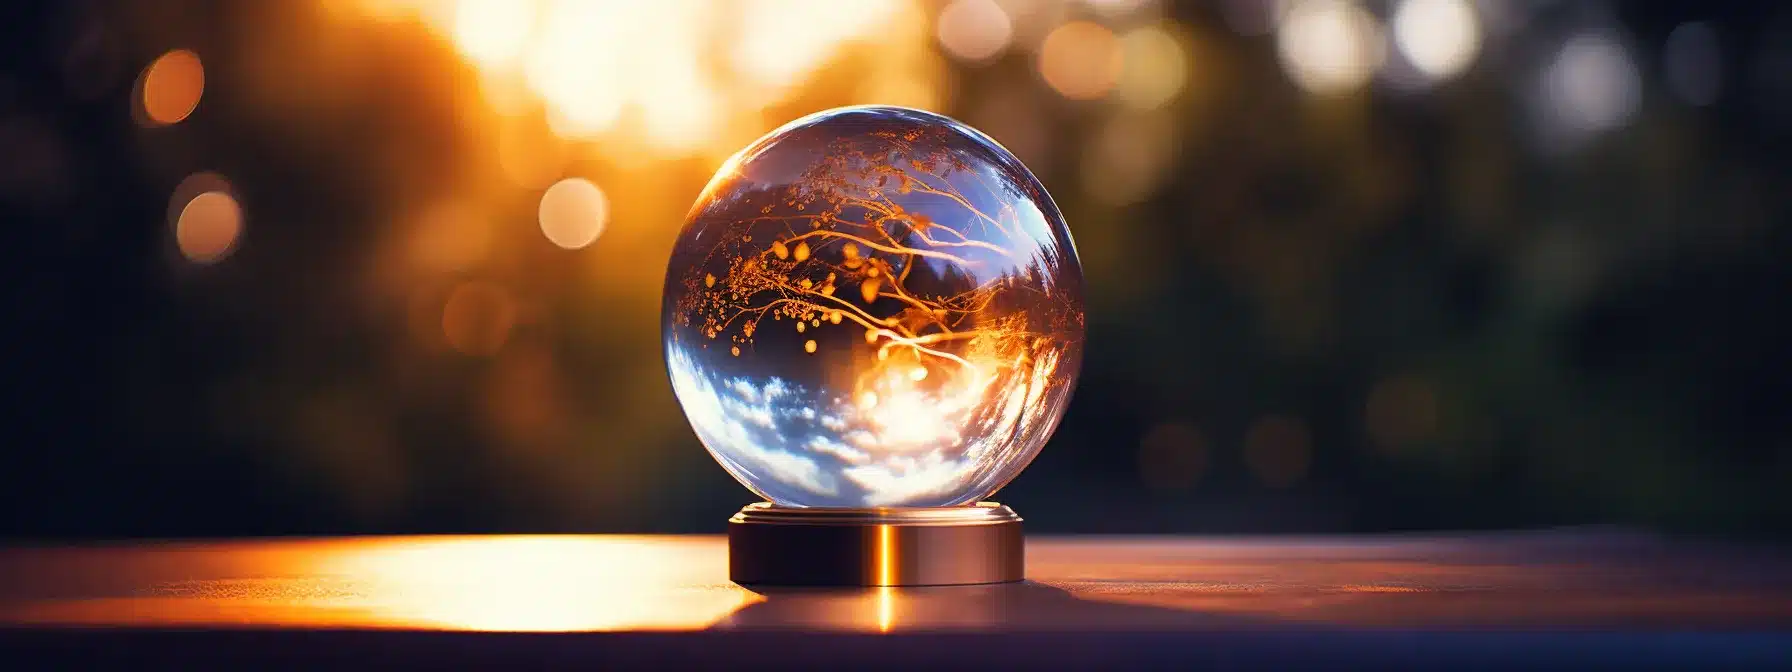 A Crystal Ball Revealing Future Trends And Patterns Of The Target Market, Guiding Marketing Strategies.